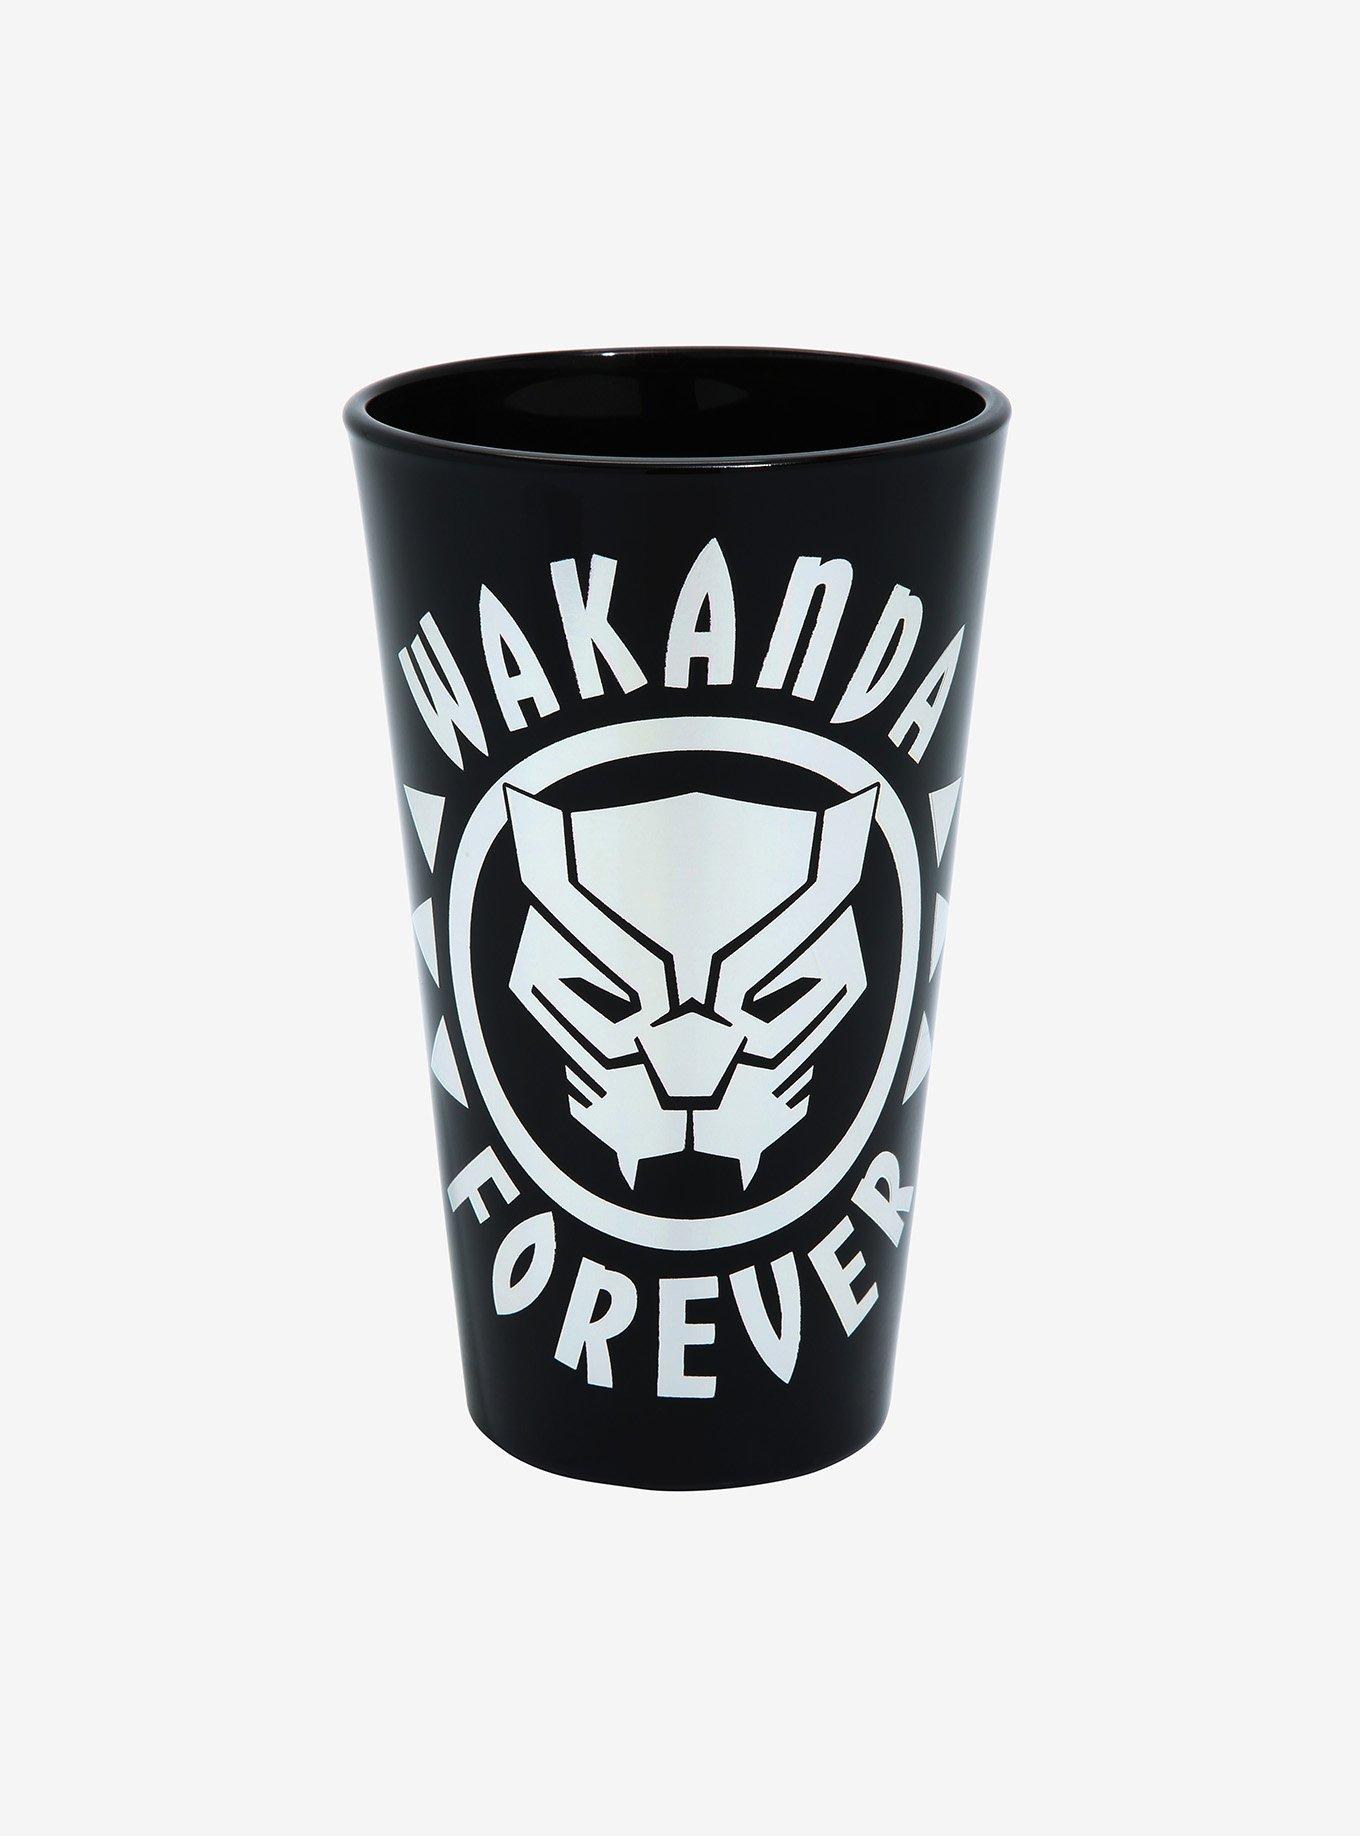 Black Panther: Wakanda Forever Silver Pint Glass, , hi-res